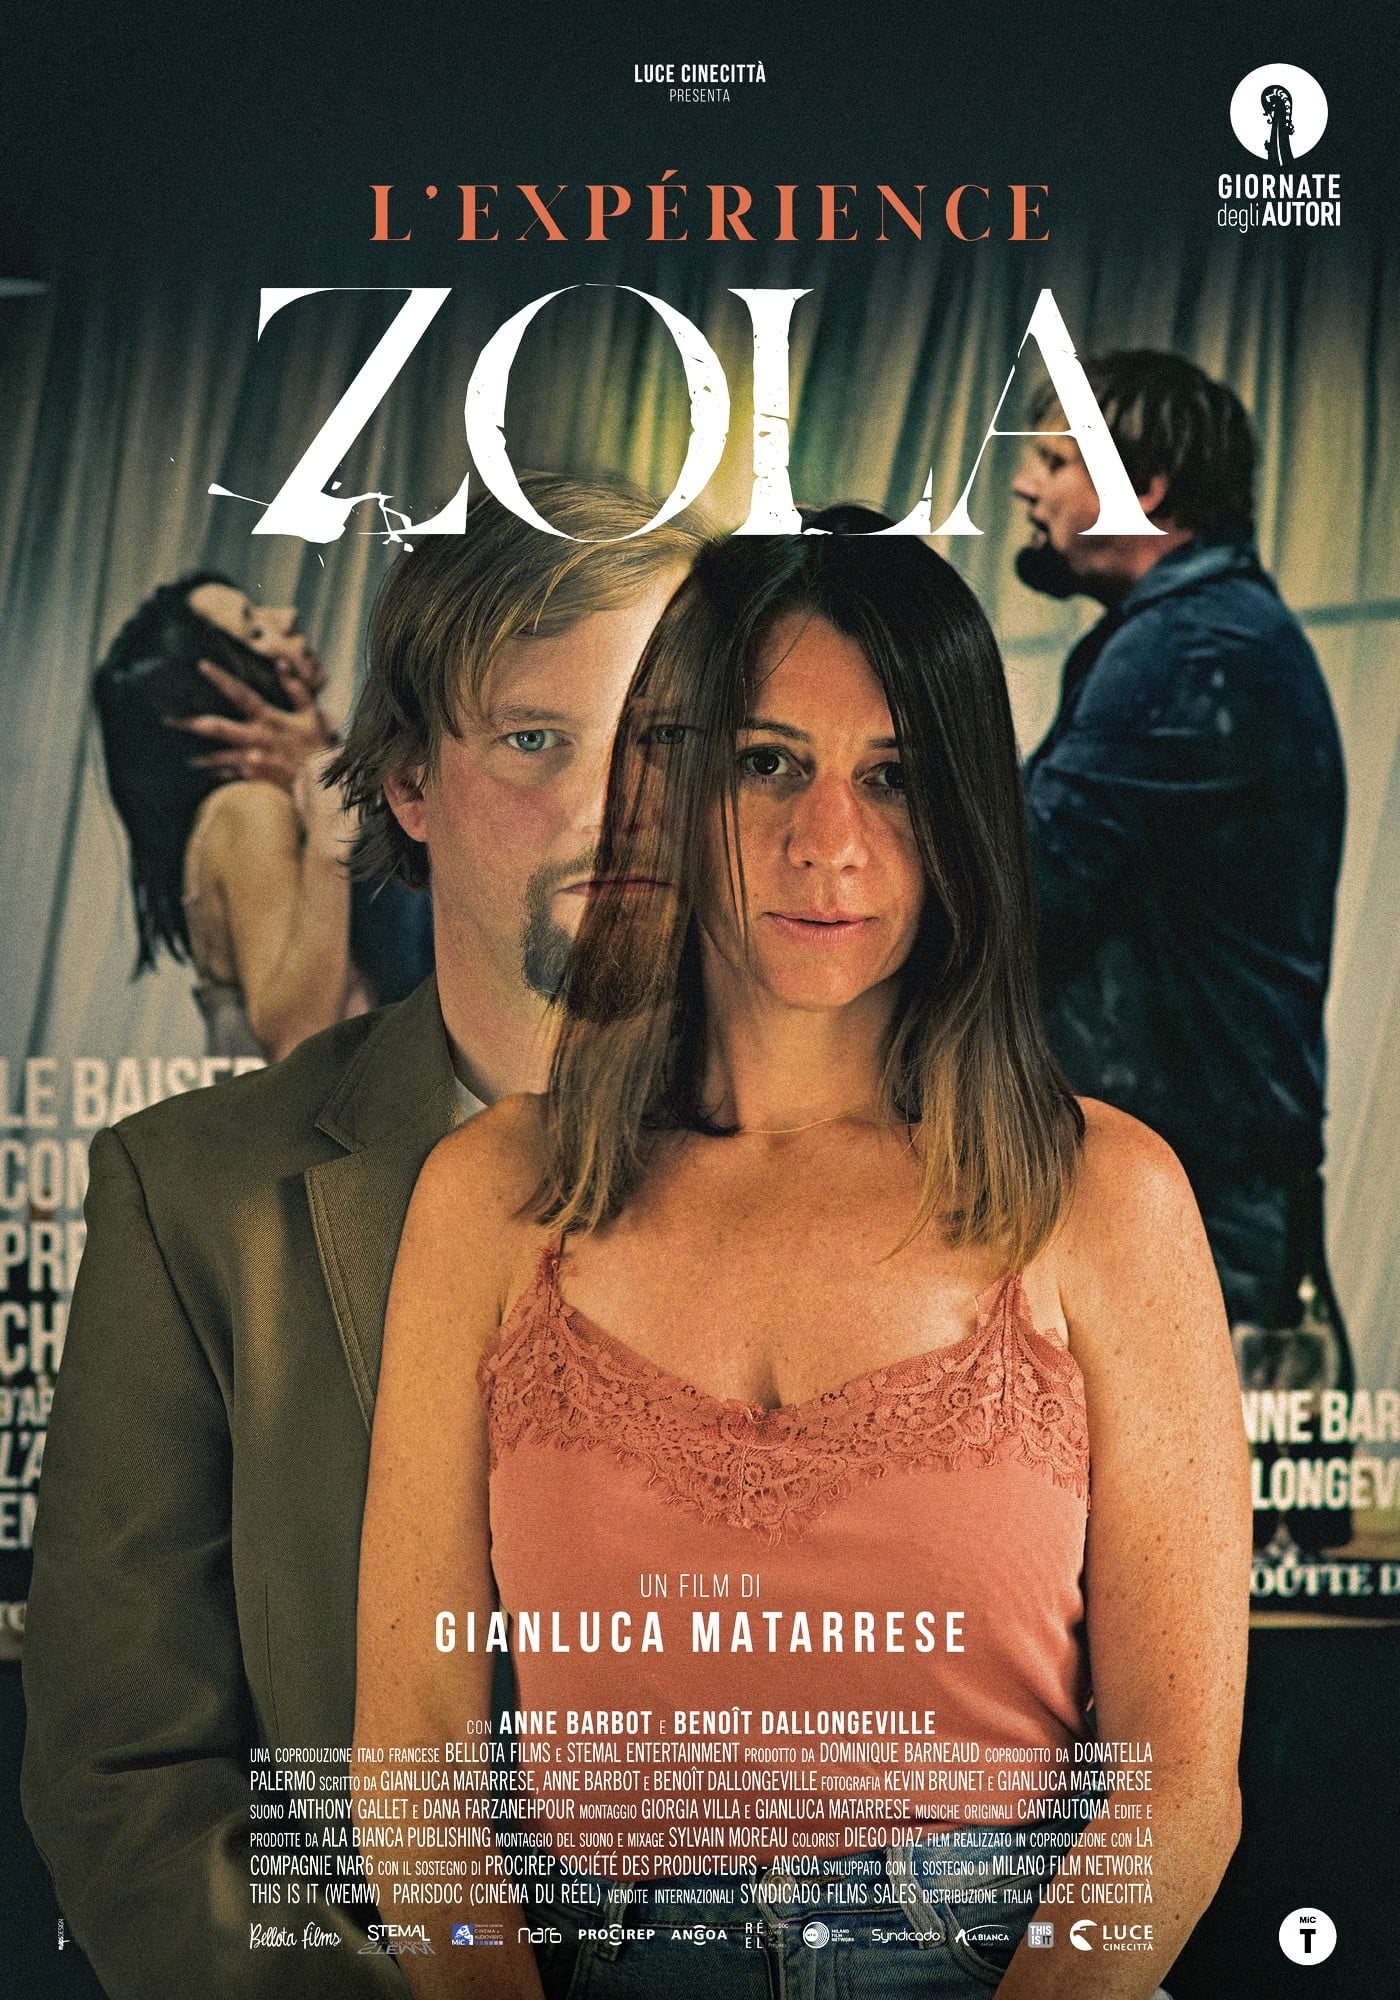 The Zola Experience